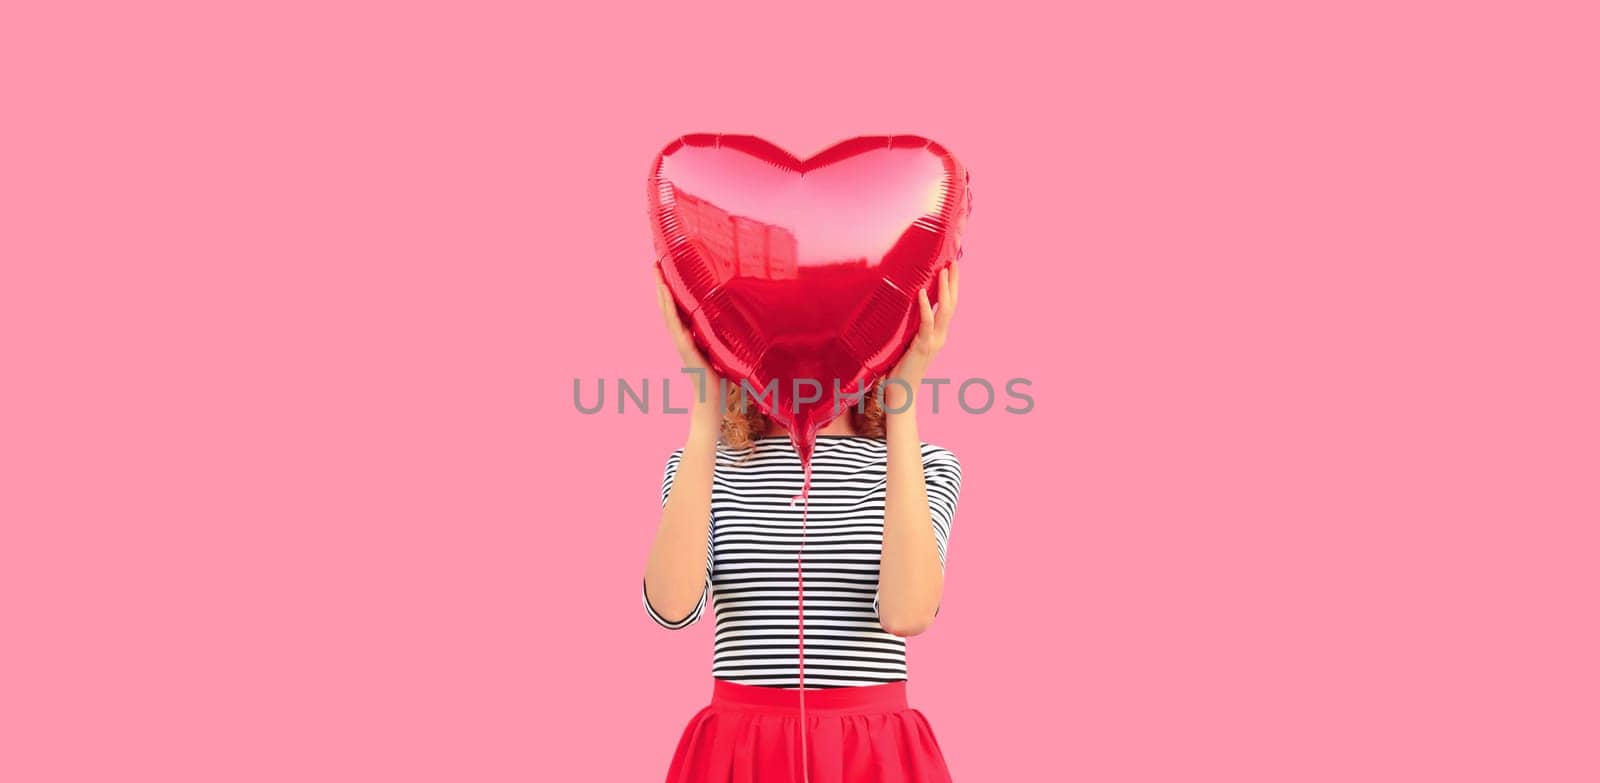 Cute portrait of happy sweet woman covering her head with red heart shaped balloon on pink studio background